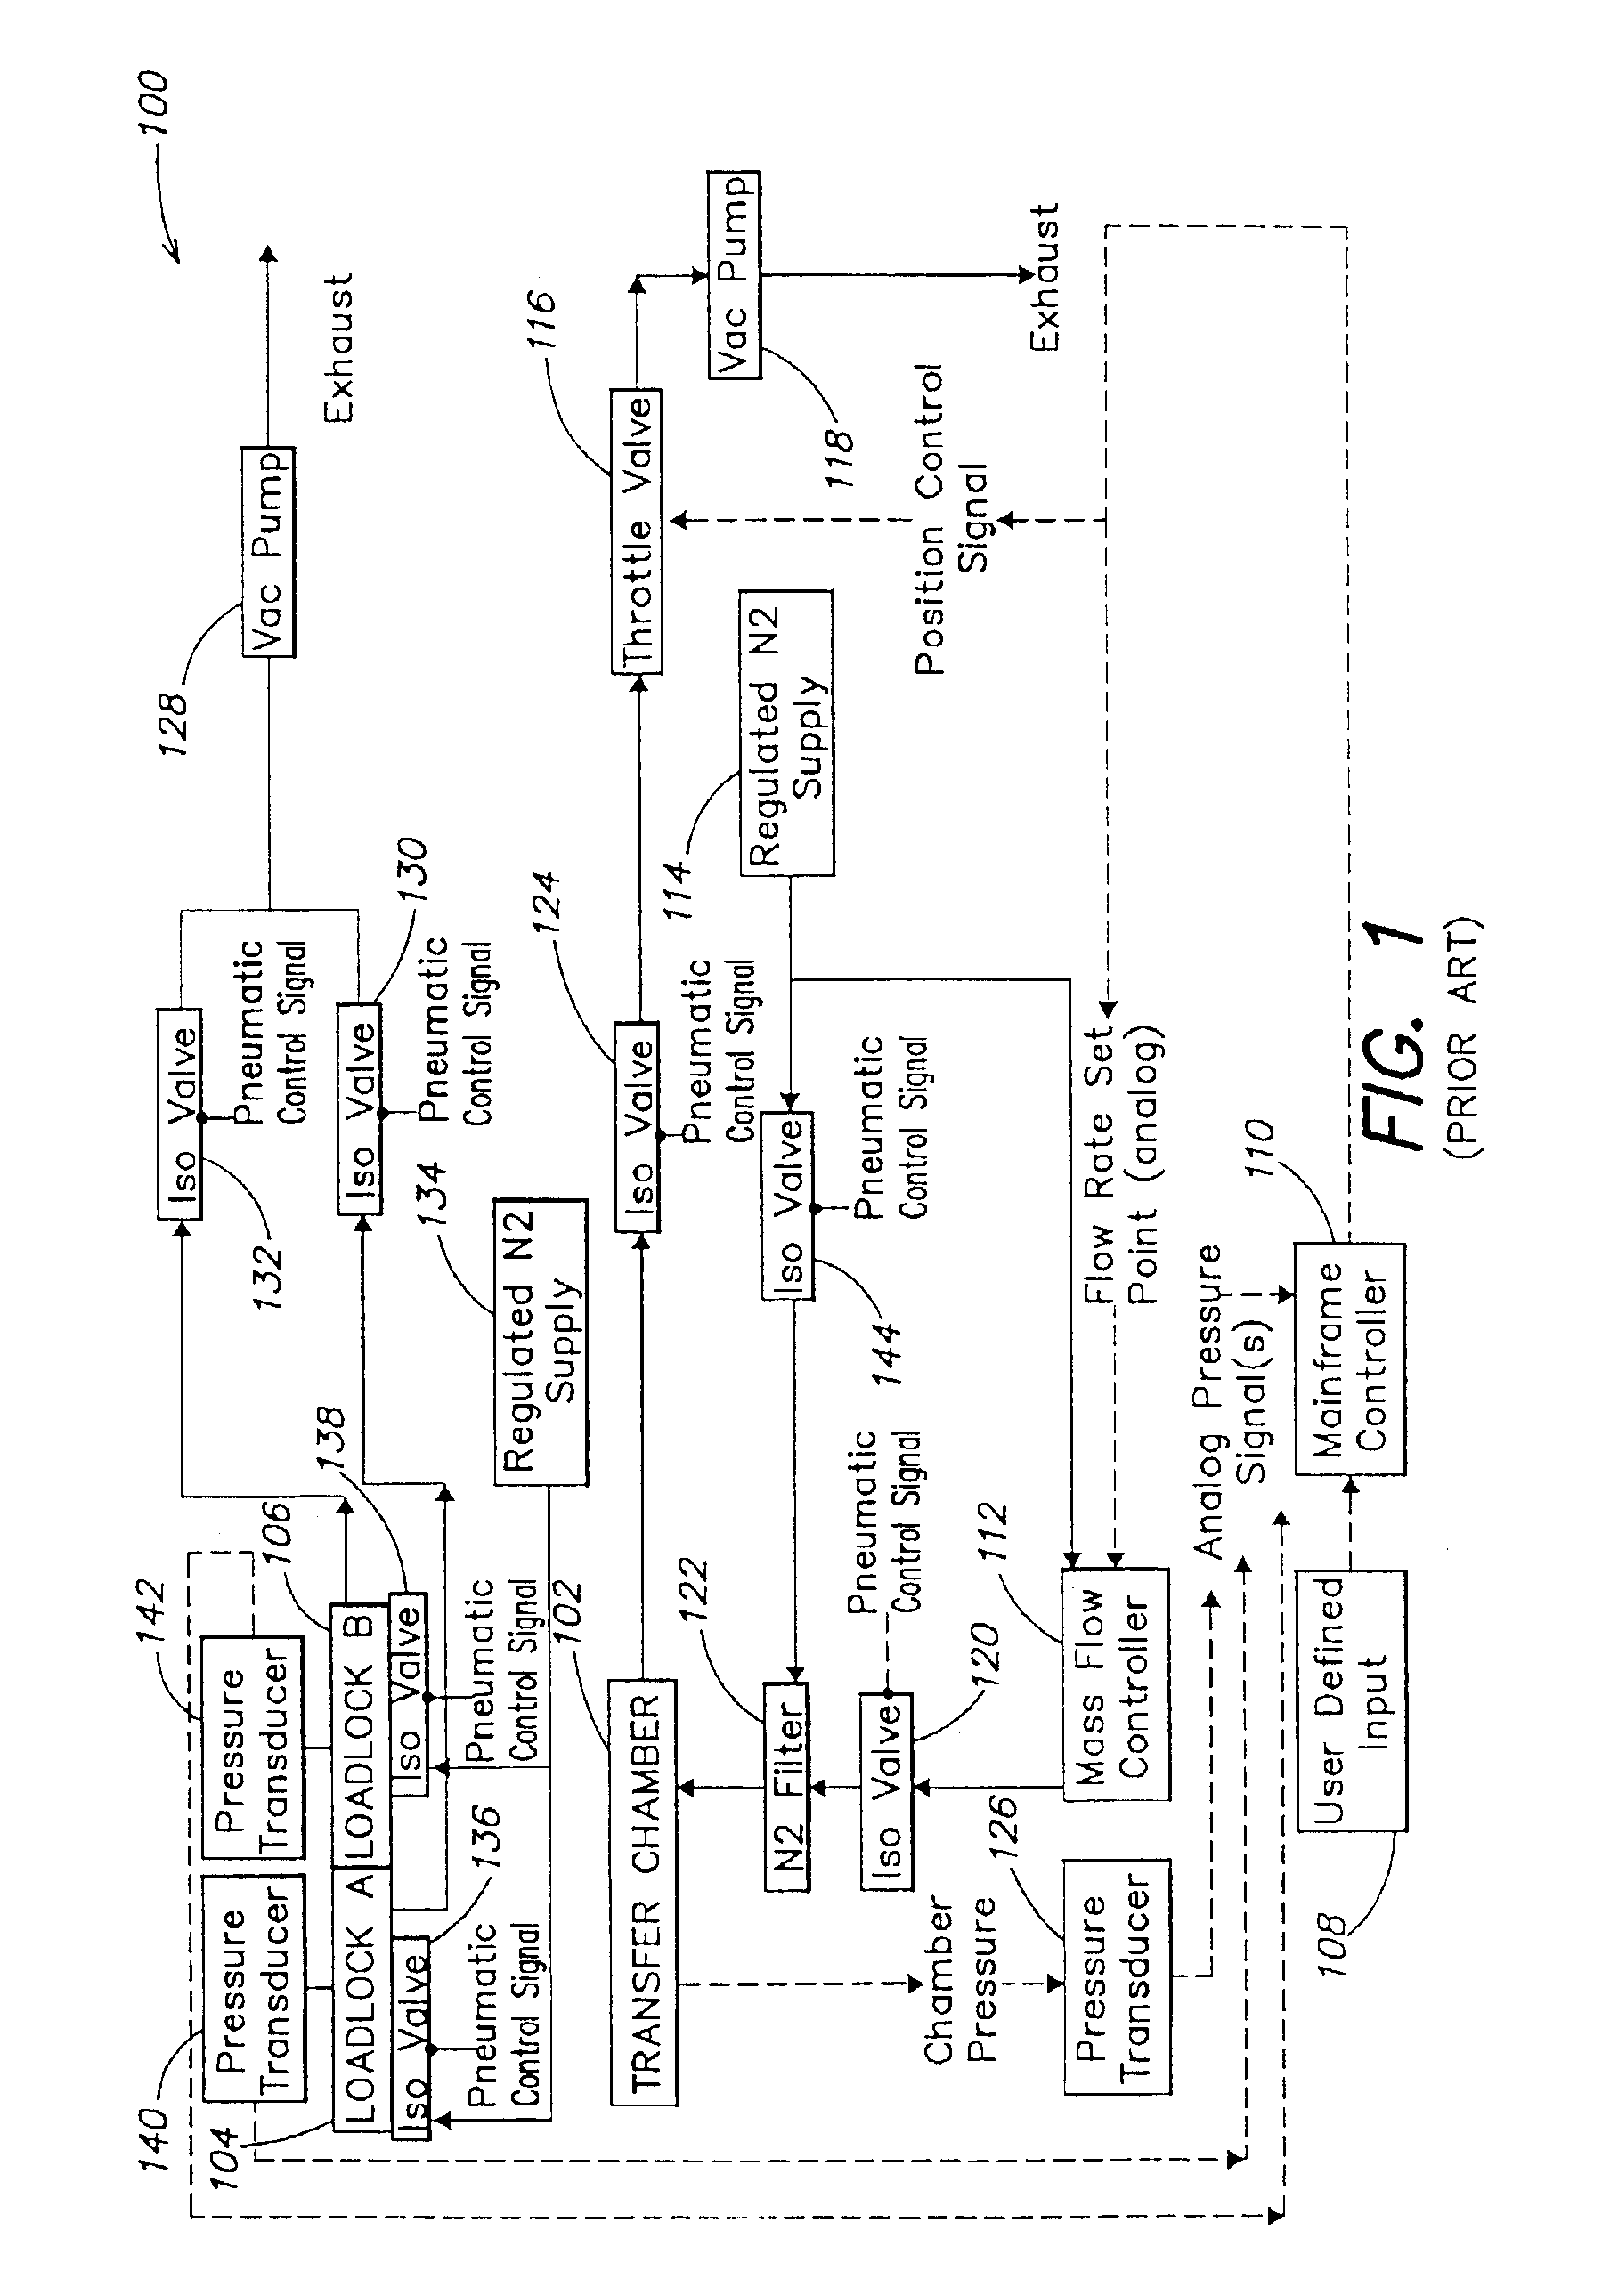 Methods and apparatus for maintaining a pressure within an environmentally controlled chamber